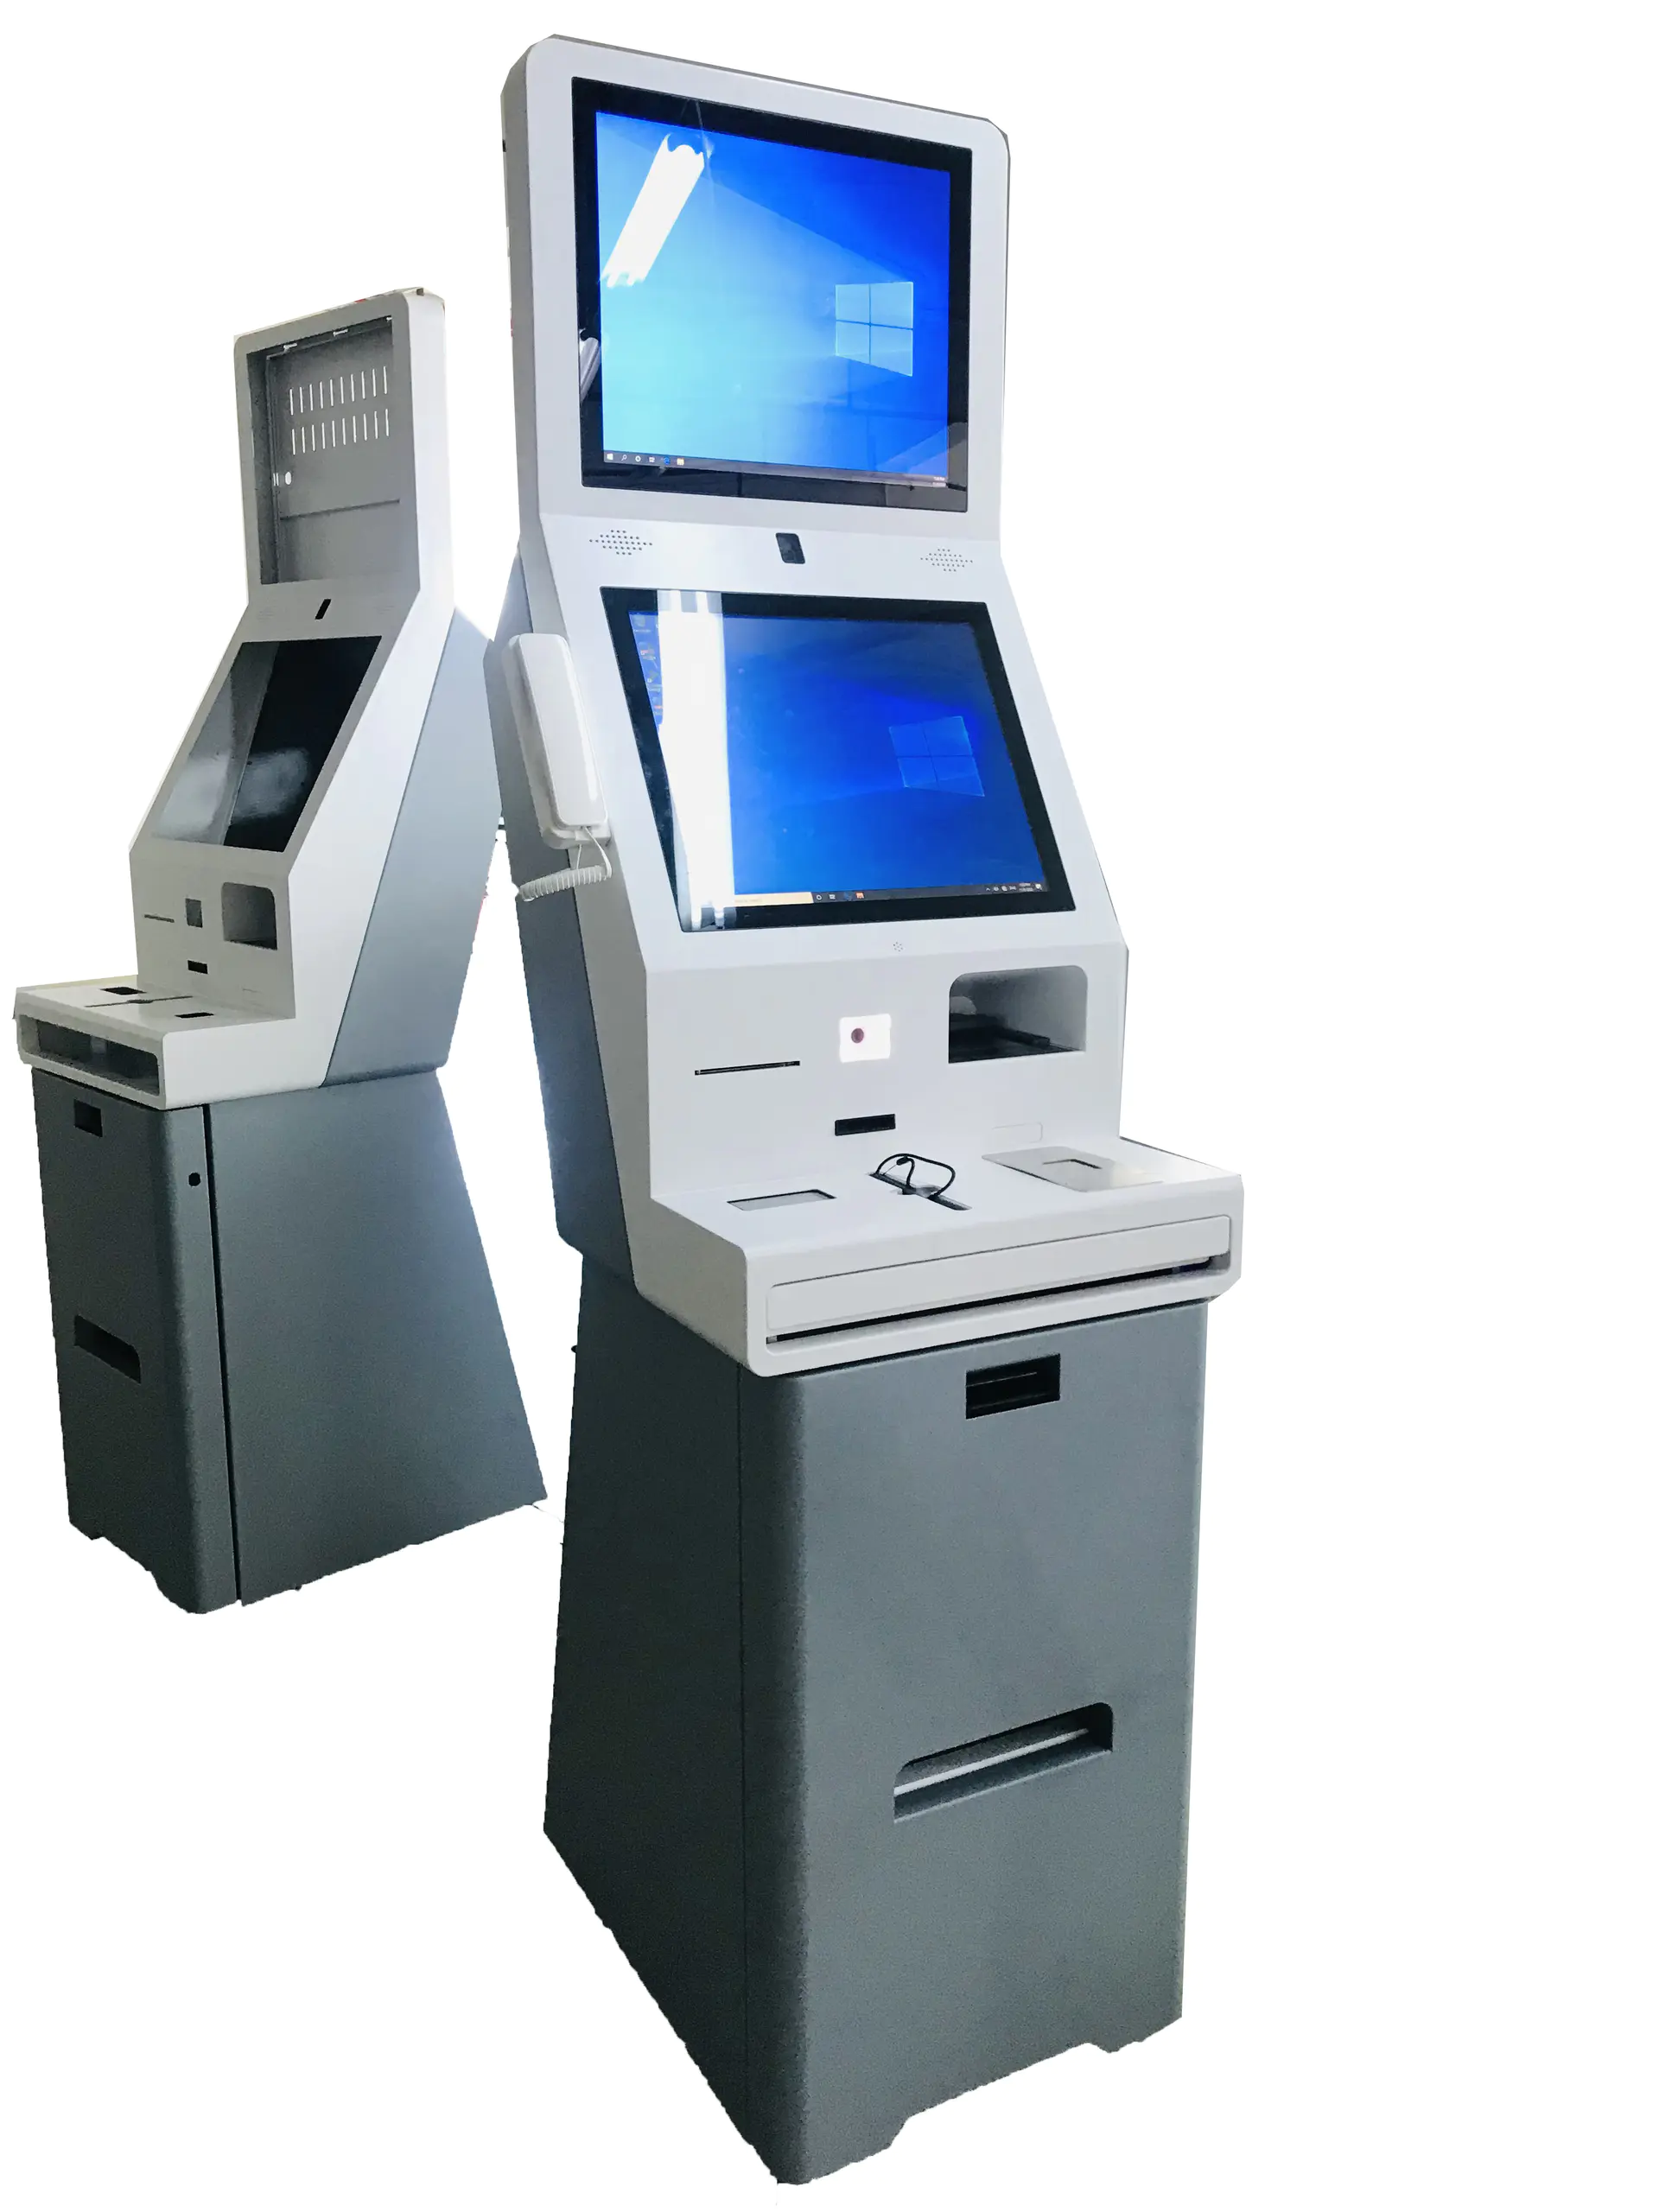 Hotel Self service payment kiosk with room card dispenser